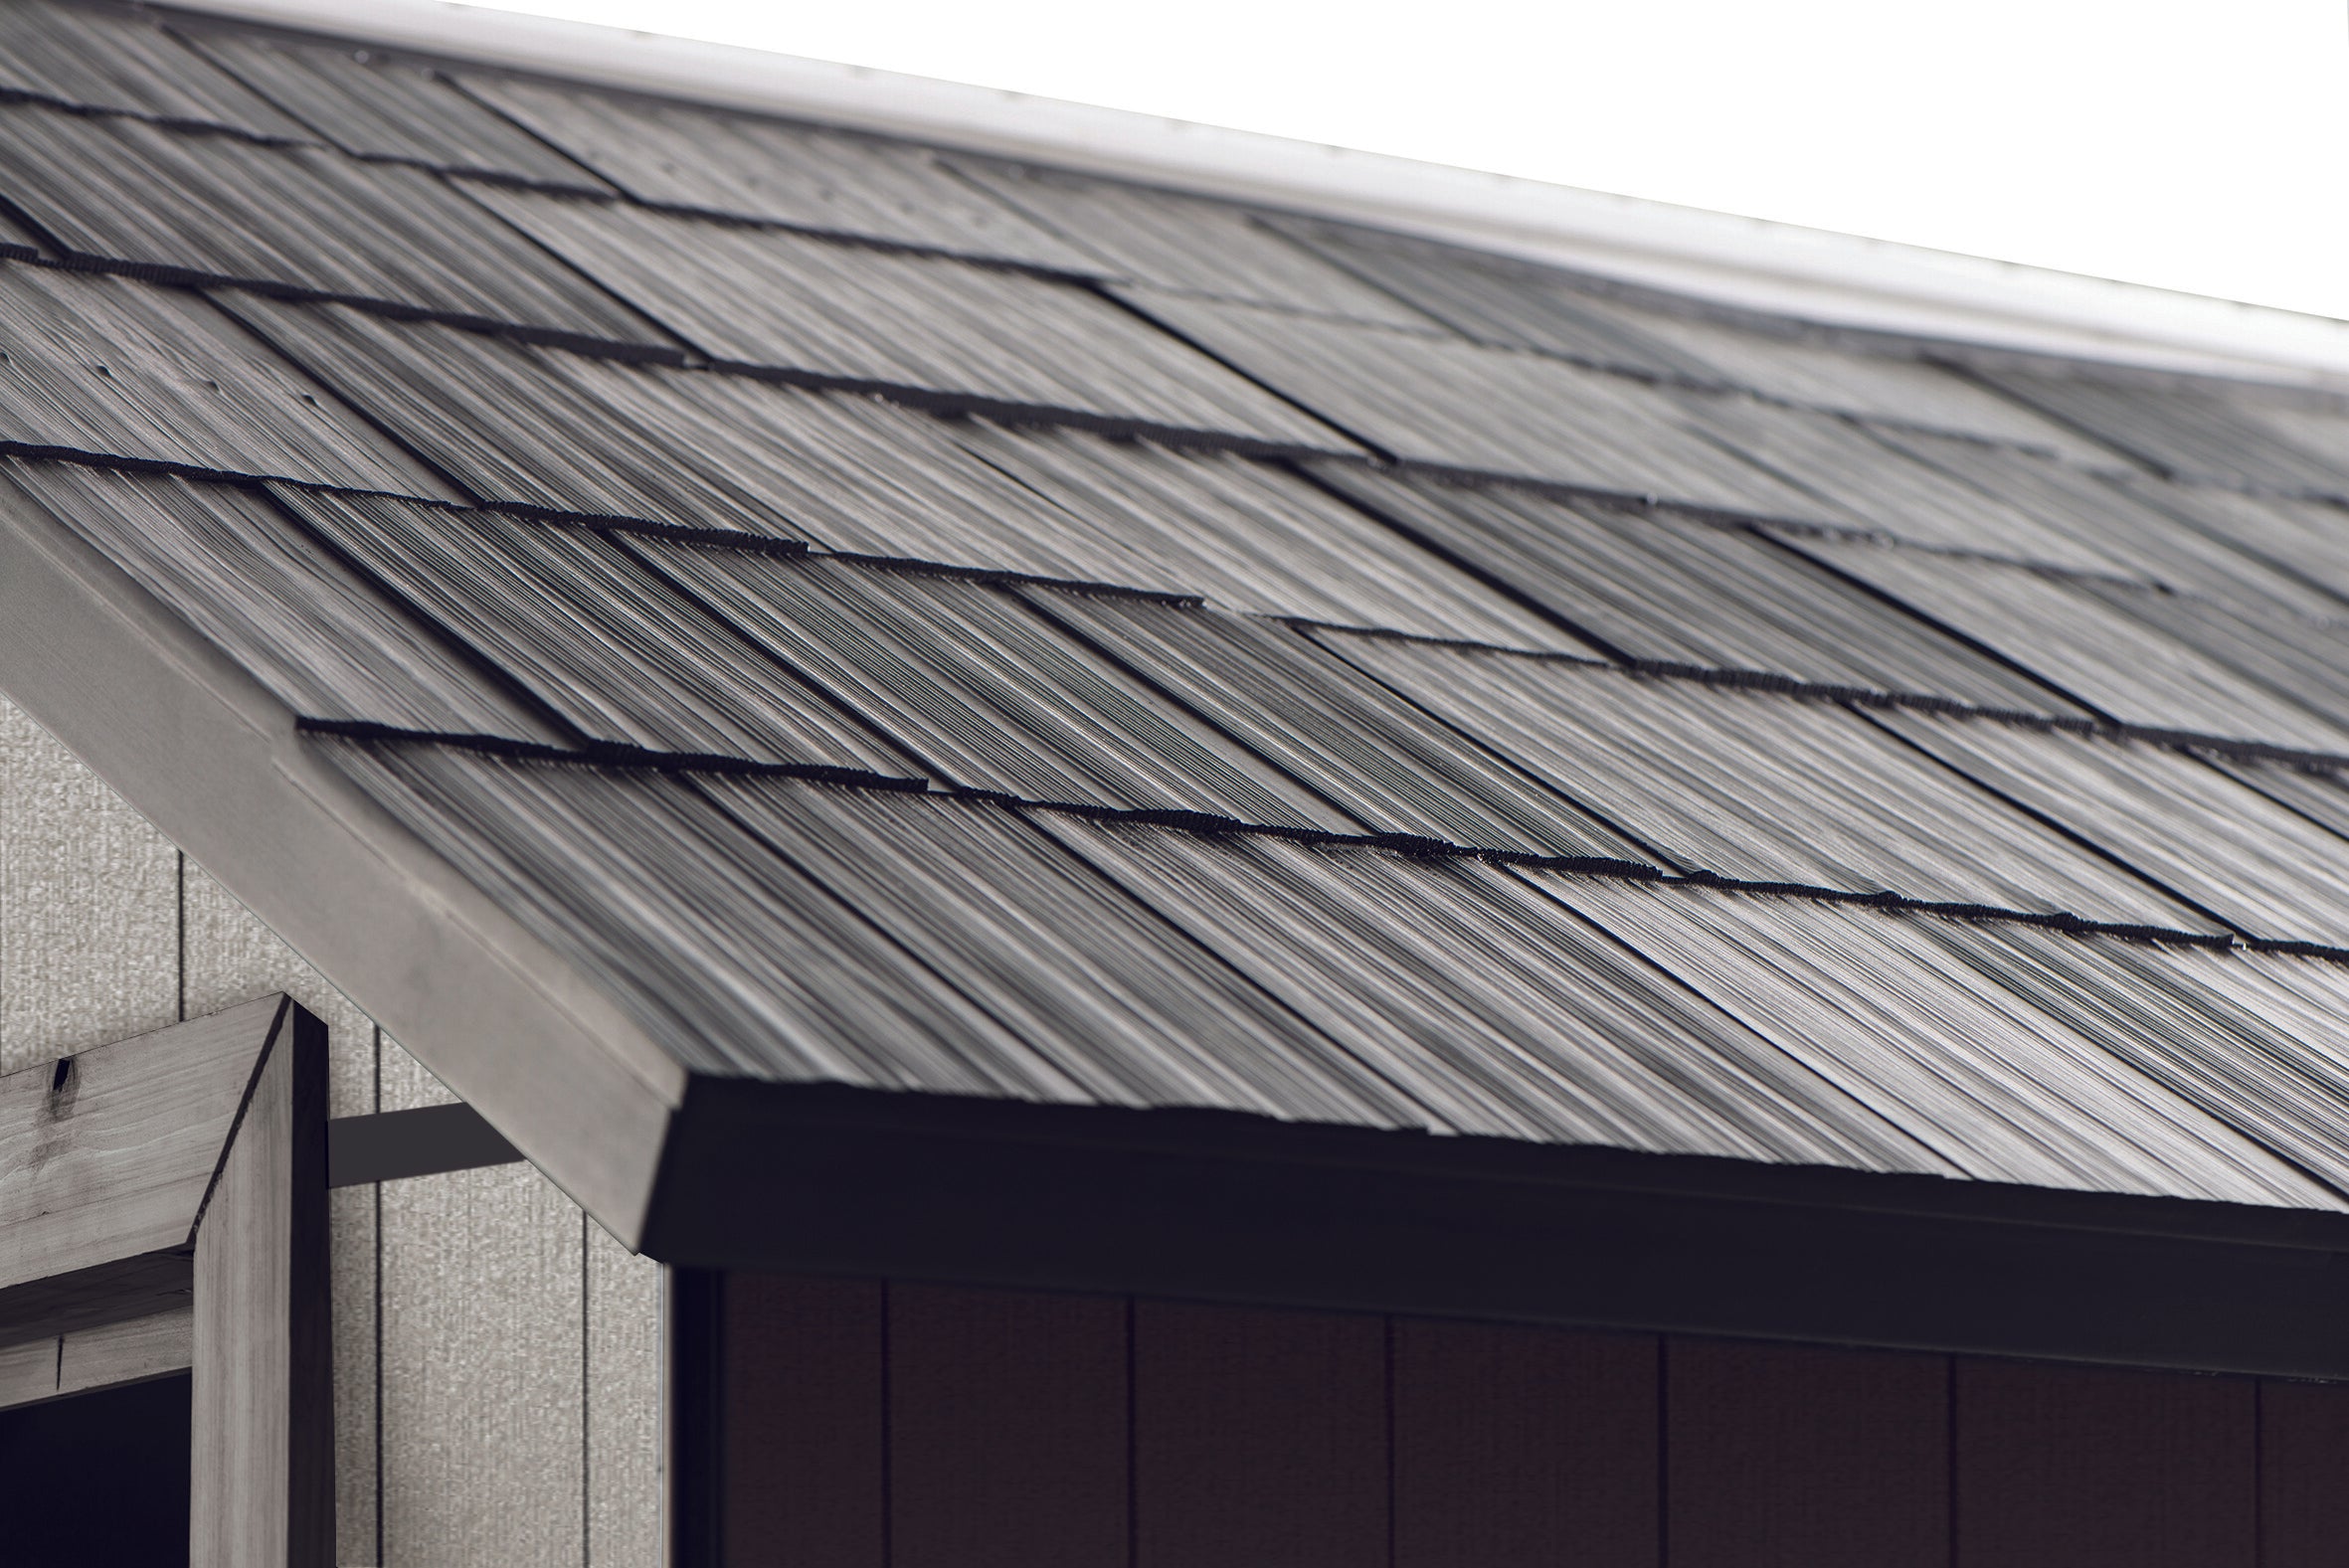 Shingle style roof panels from Keter Oakland Sheds